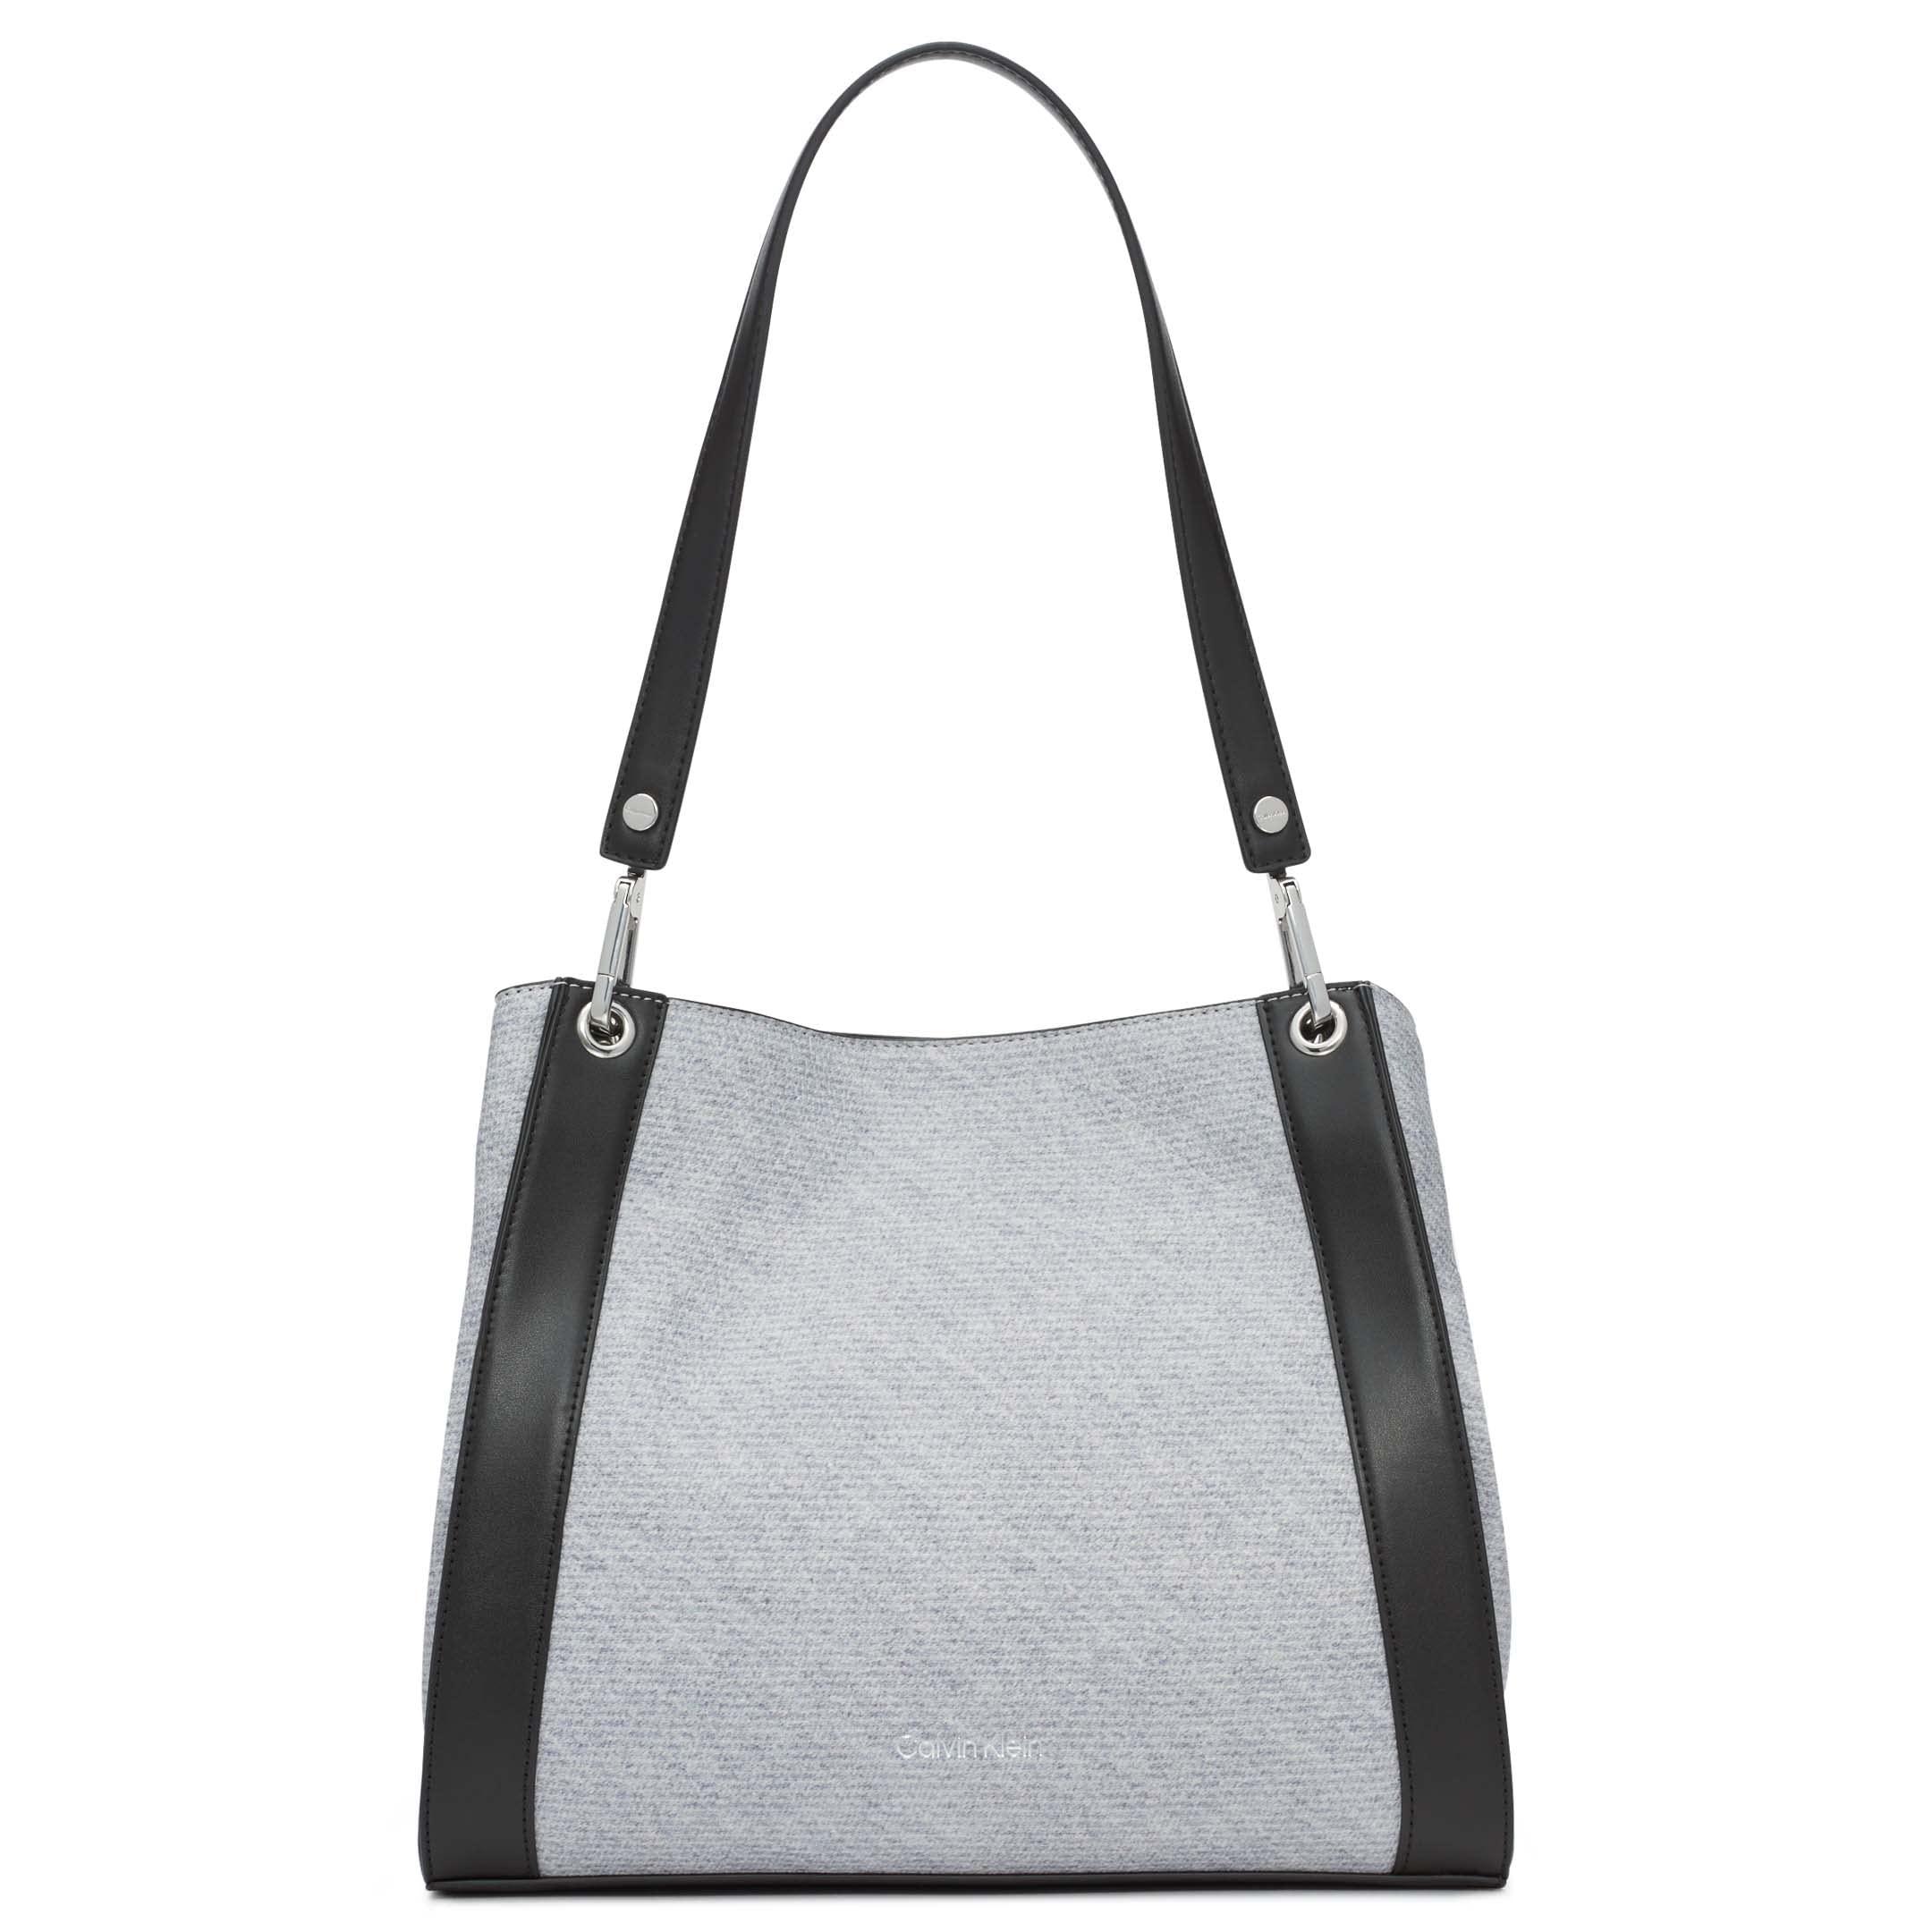 Calvin Klein Reyna Novelty Triple Compartment Shoulder Bag in Gray | Lyst